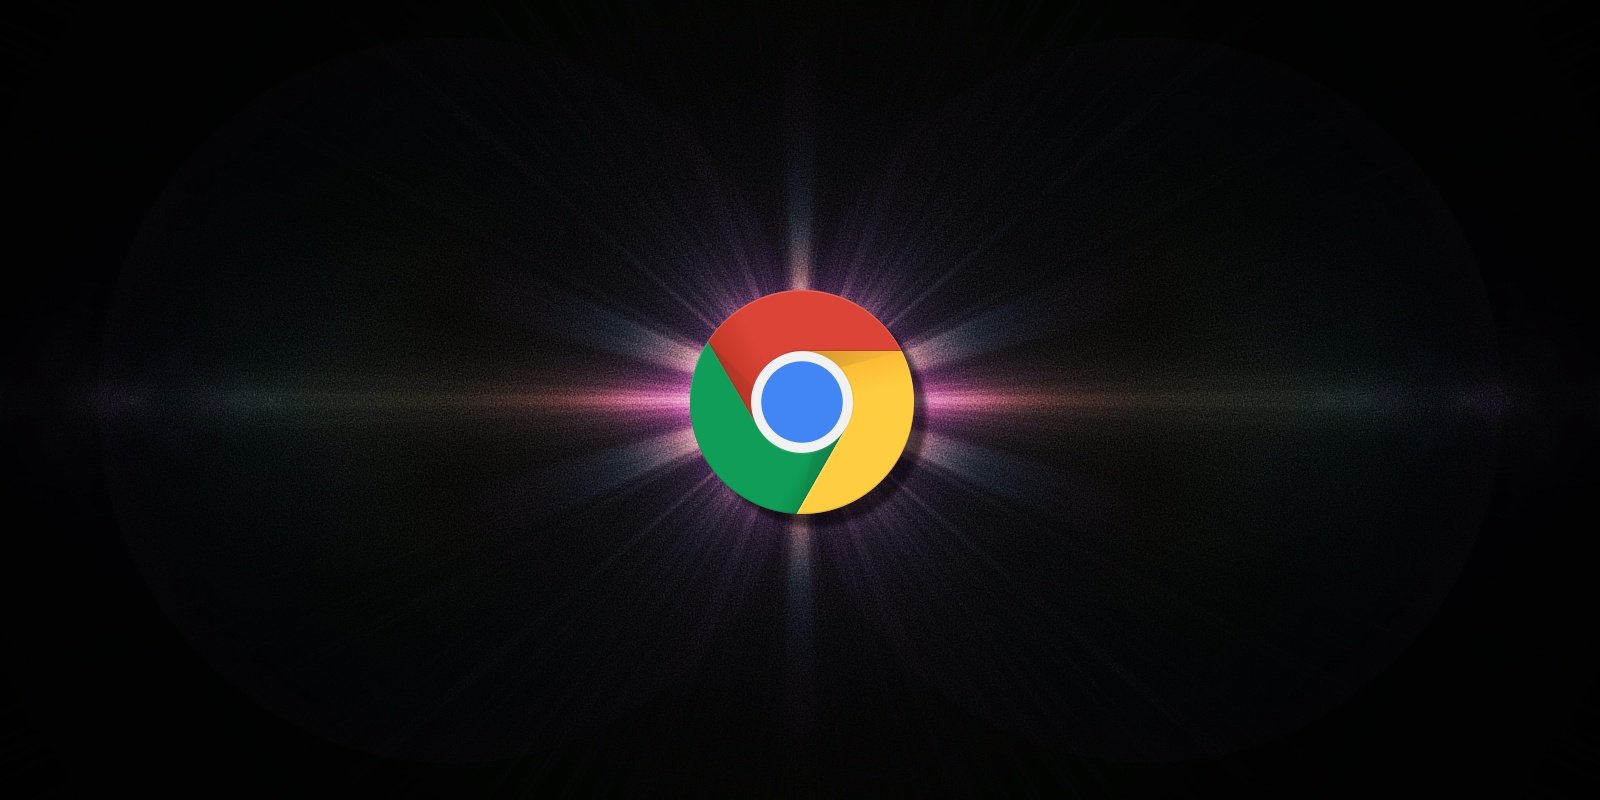 Google to fight hackers with weekly Chrome security updates – Source: www.bleepingcomputer.com